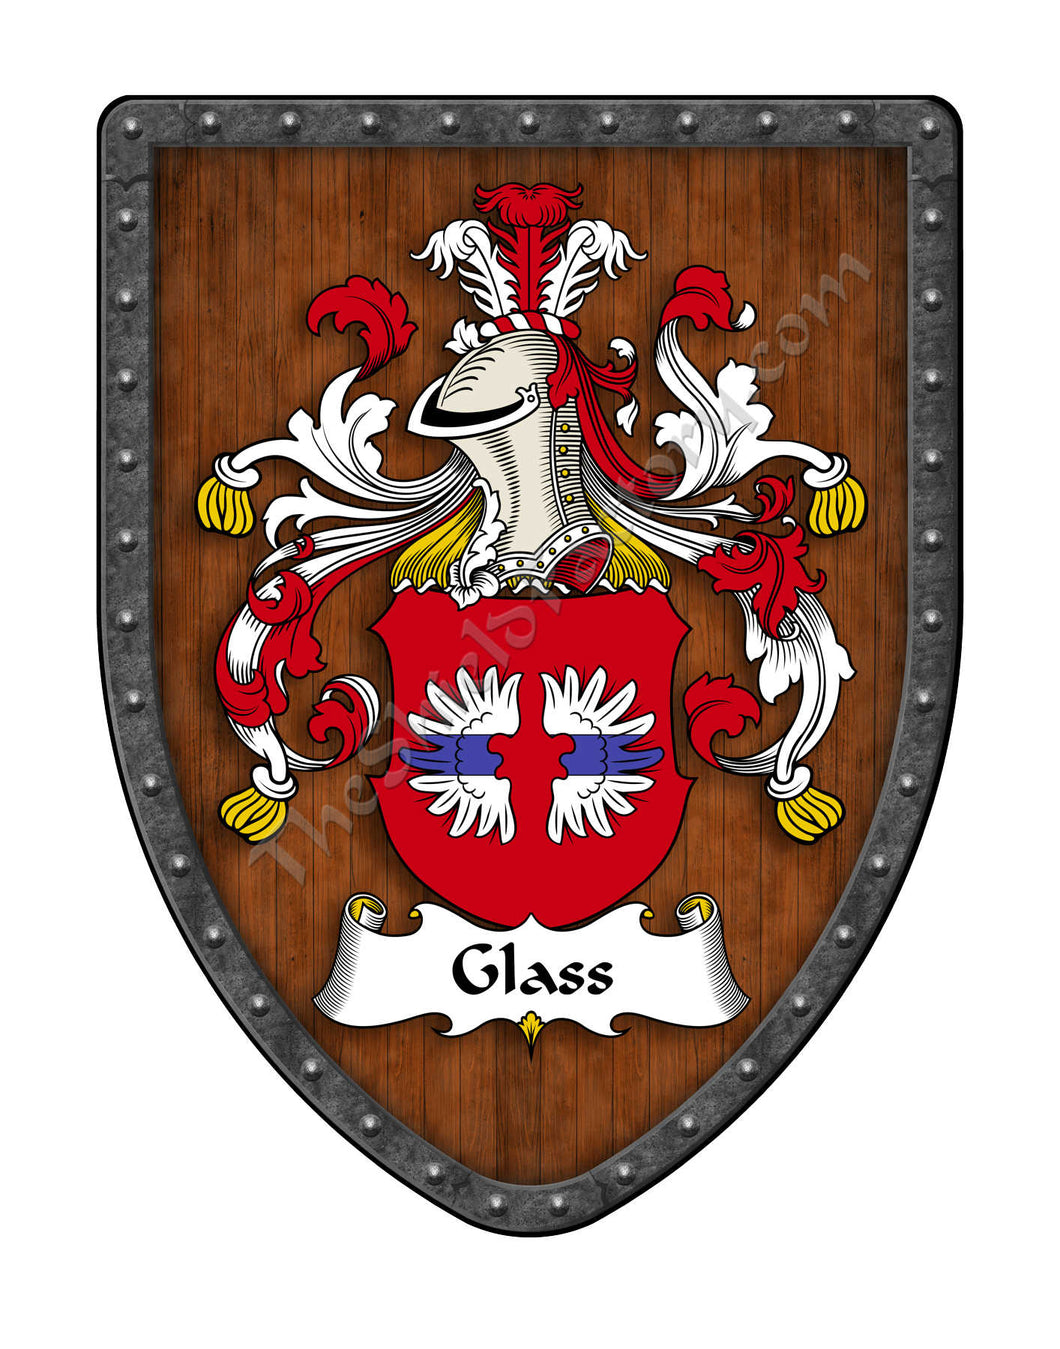 Glass Coat of Arms Shield